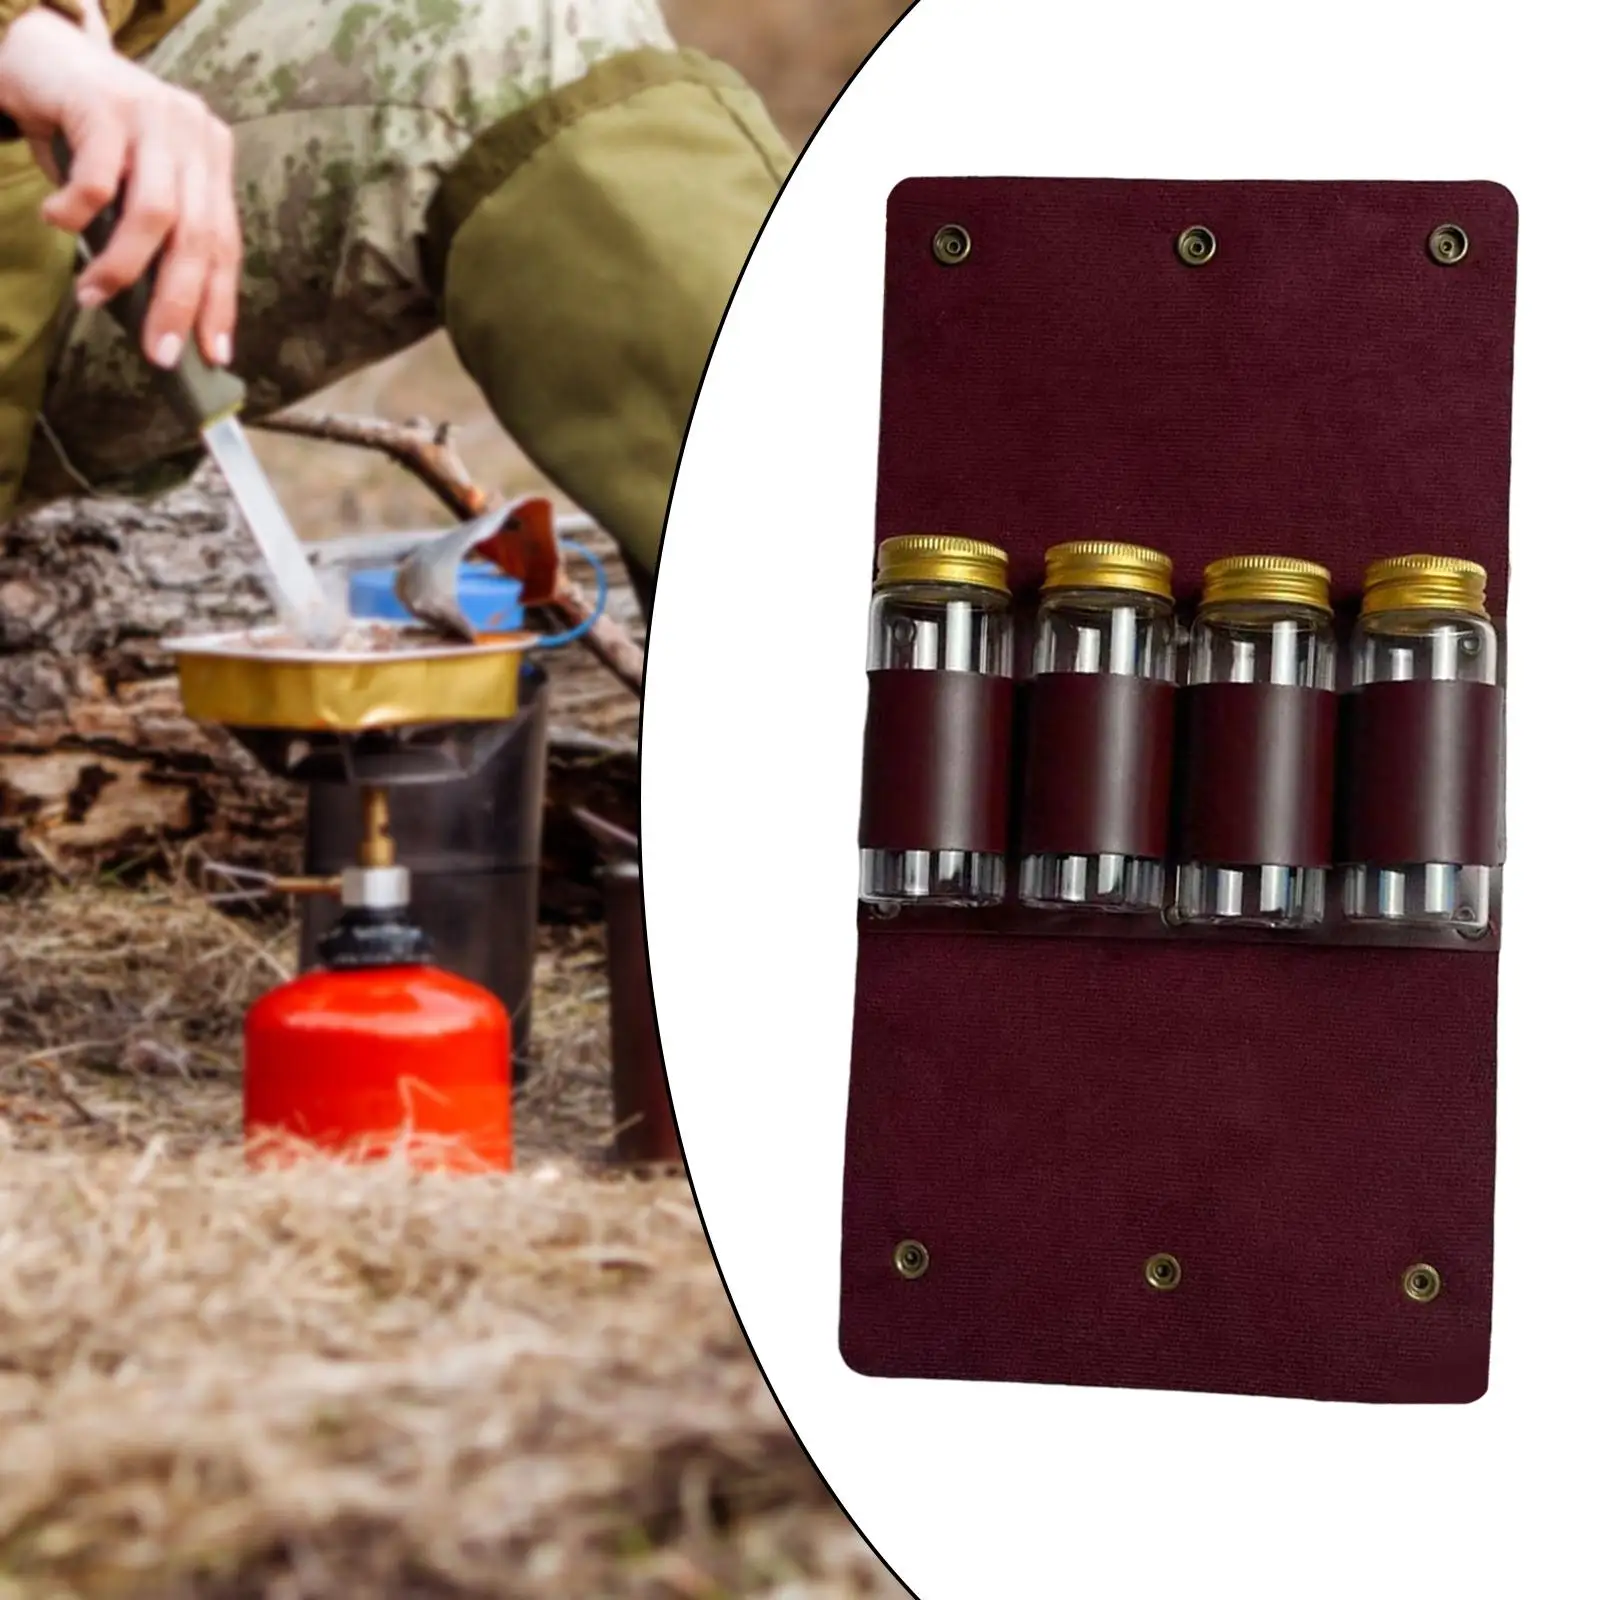 Portable Condiment Bottle Kit Containers for Traveling Picnic